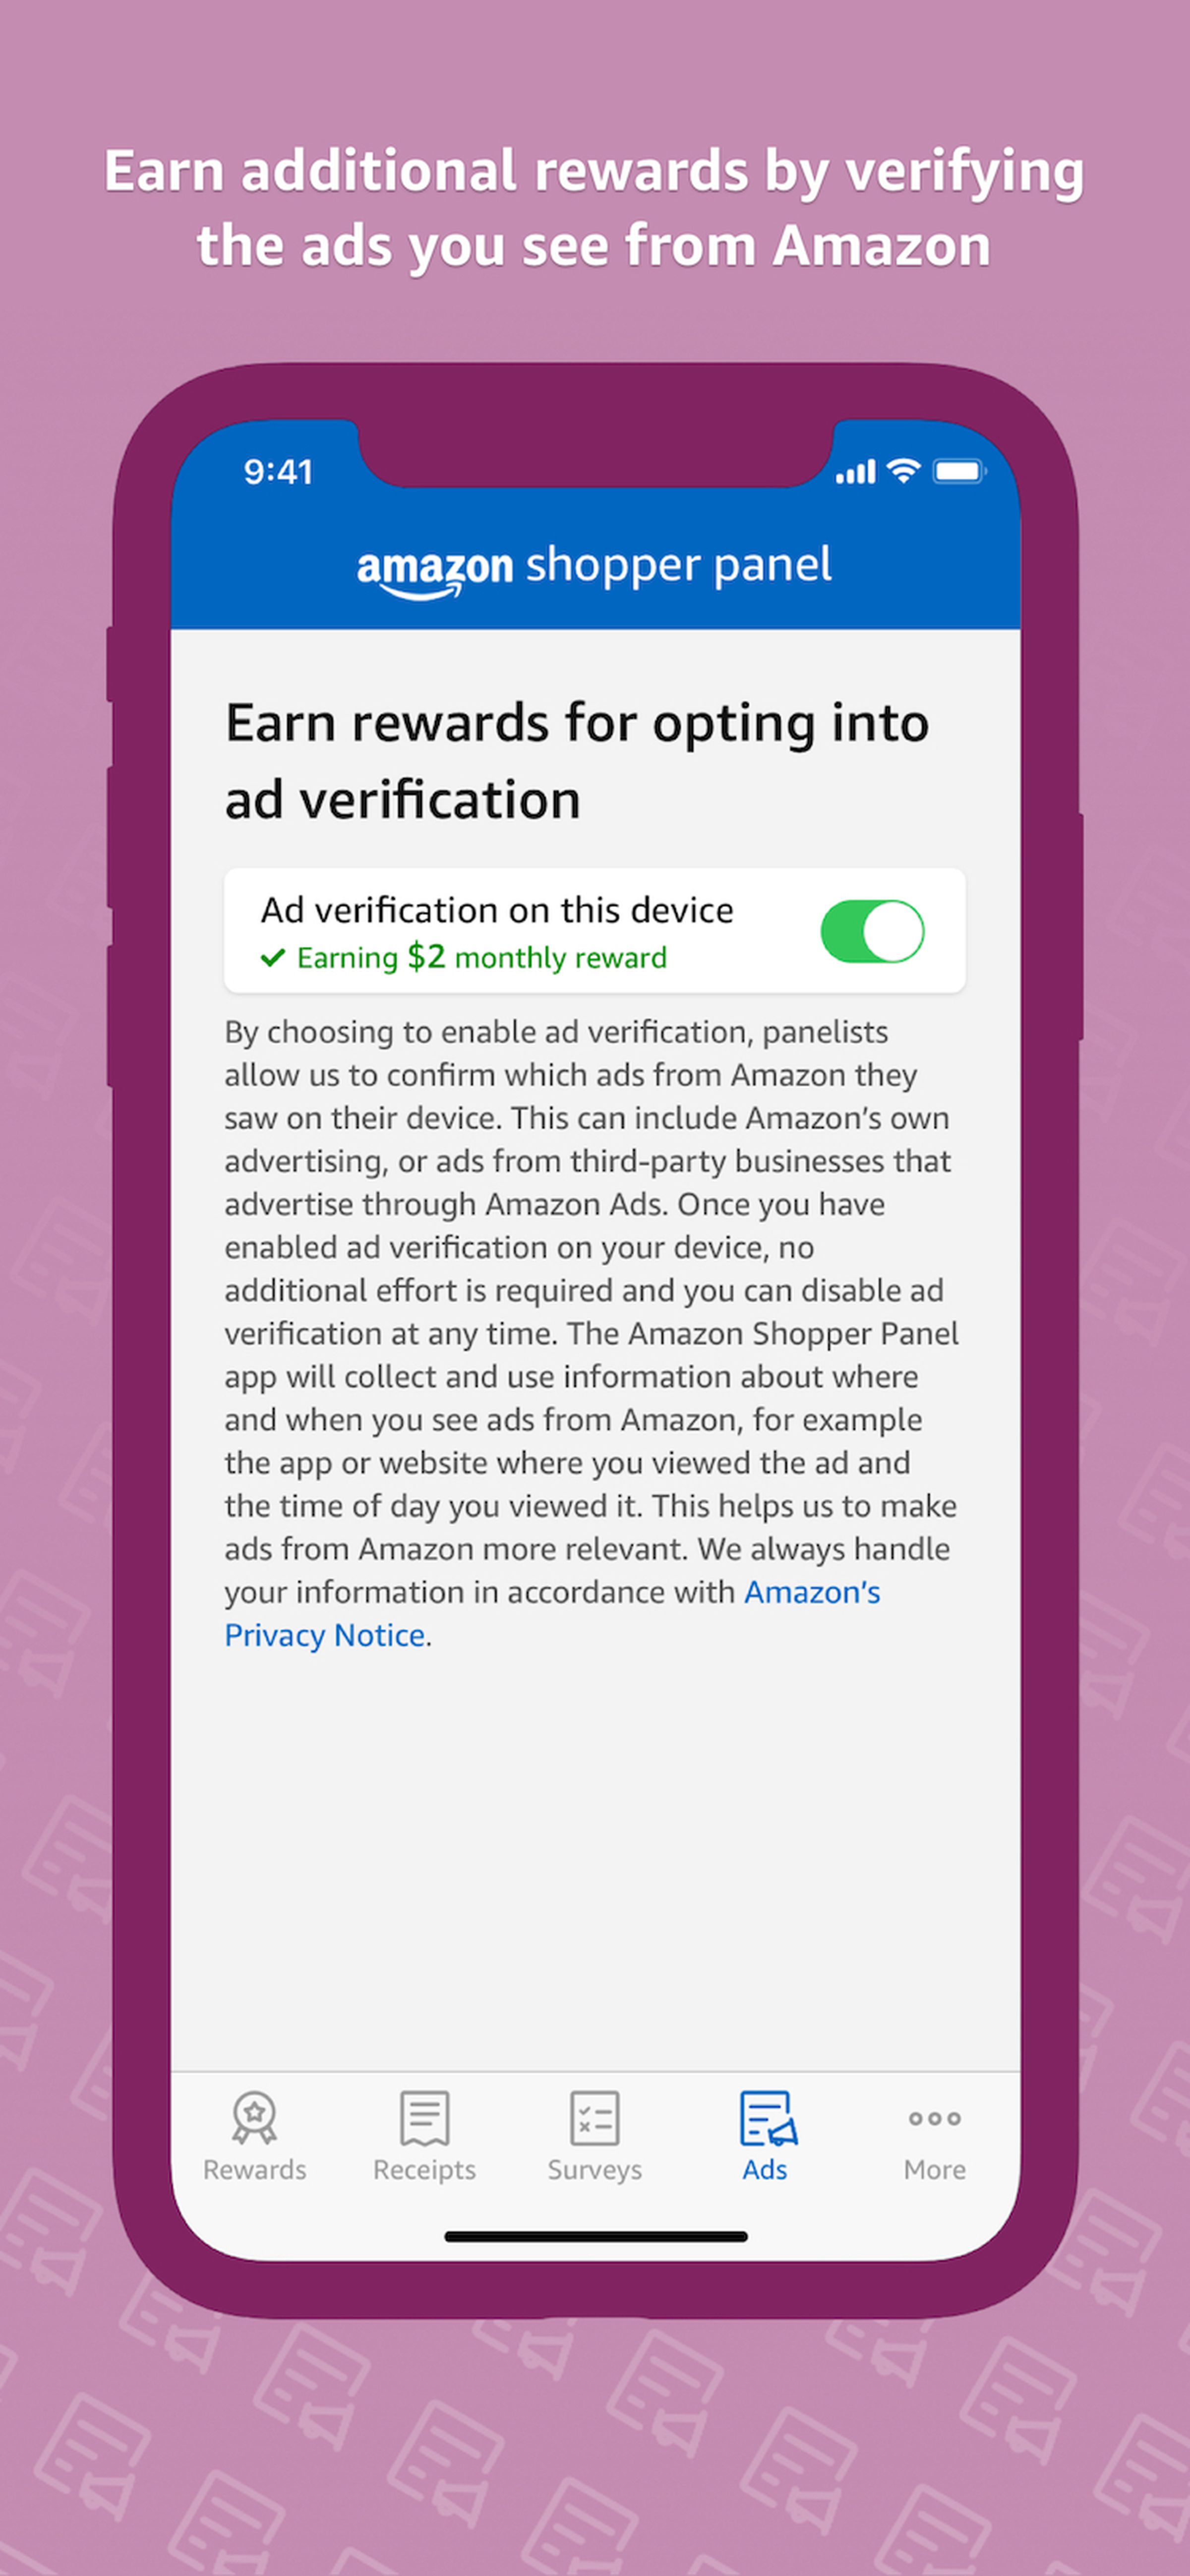 Screenshot of Amazon’s Shopper Panel app, with the “earn rewards for opting into ad verification” screen open.